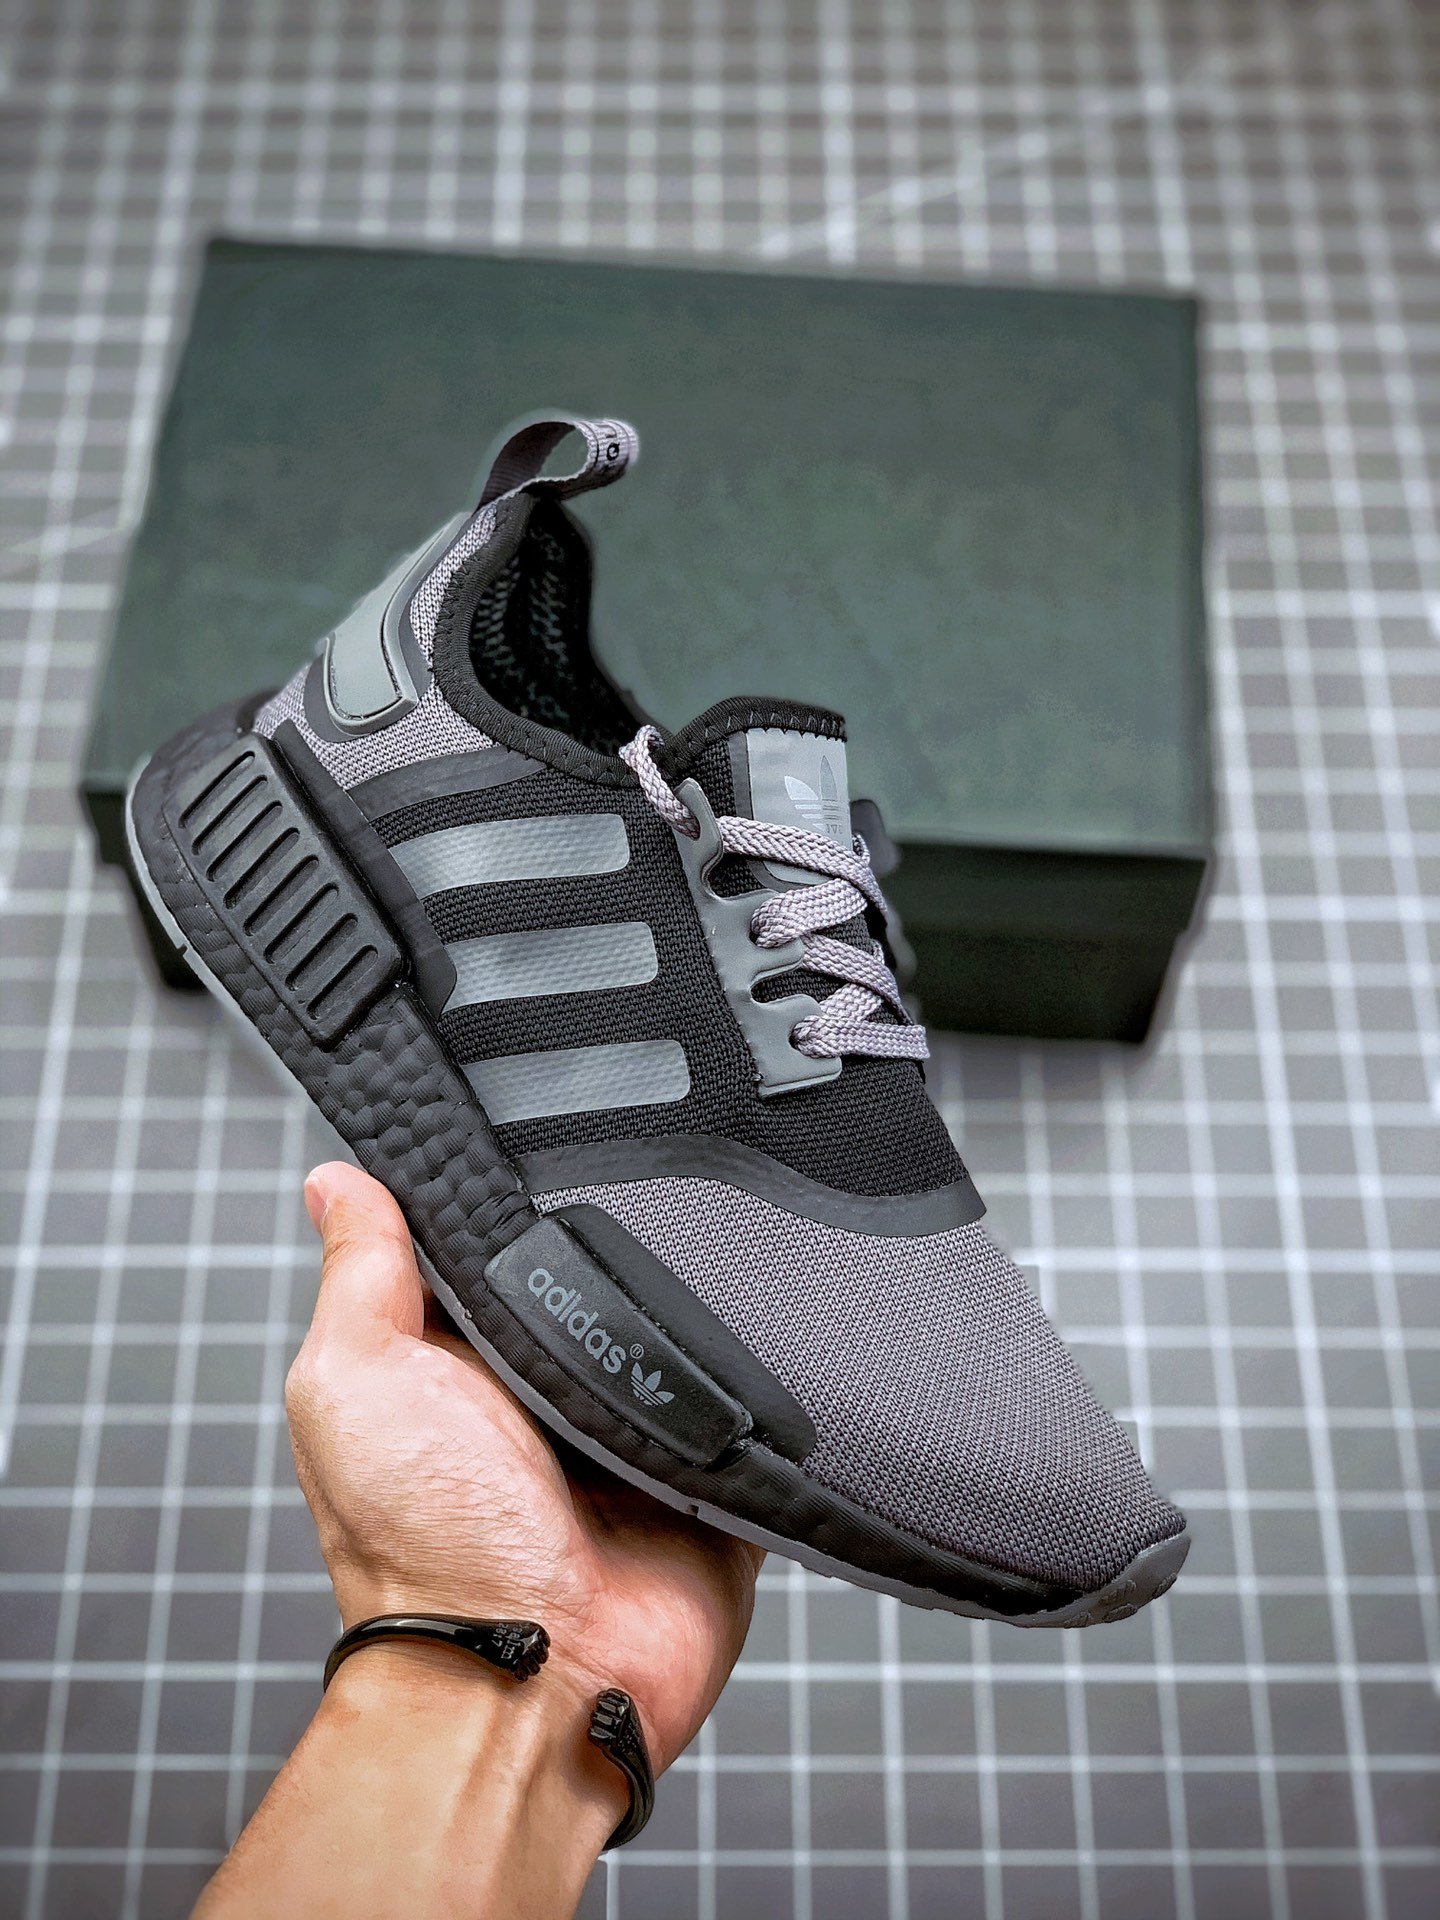 adidas NMD R1 Grey Four Black For Sale – Sneaker Hello